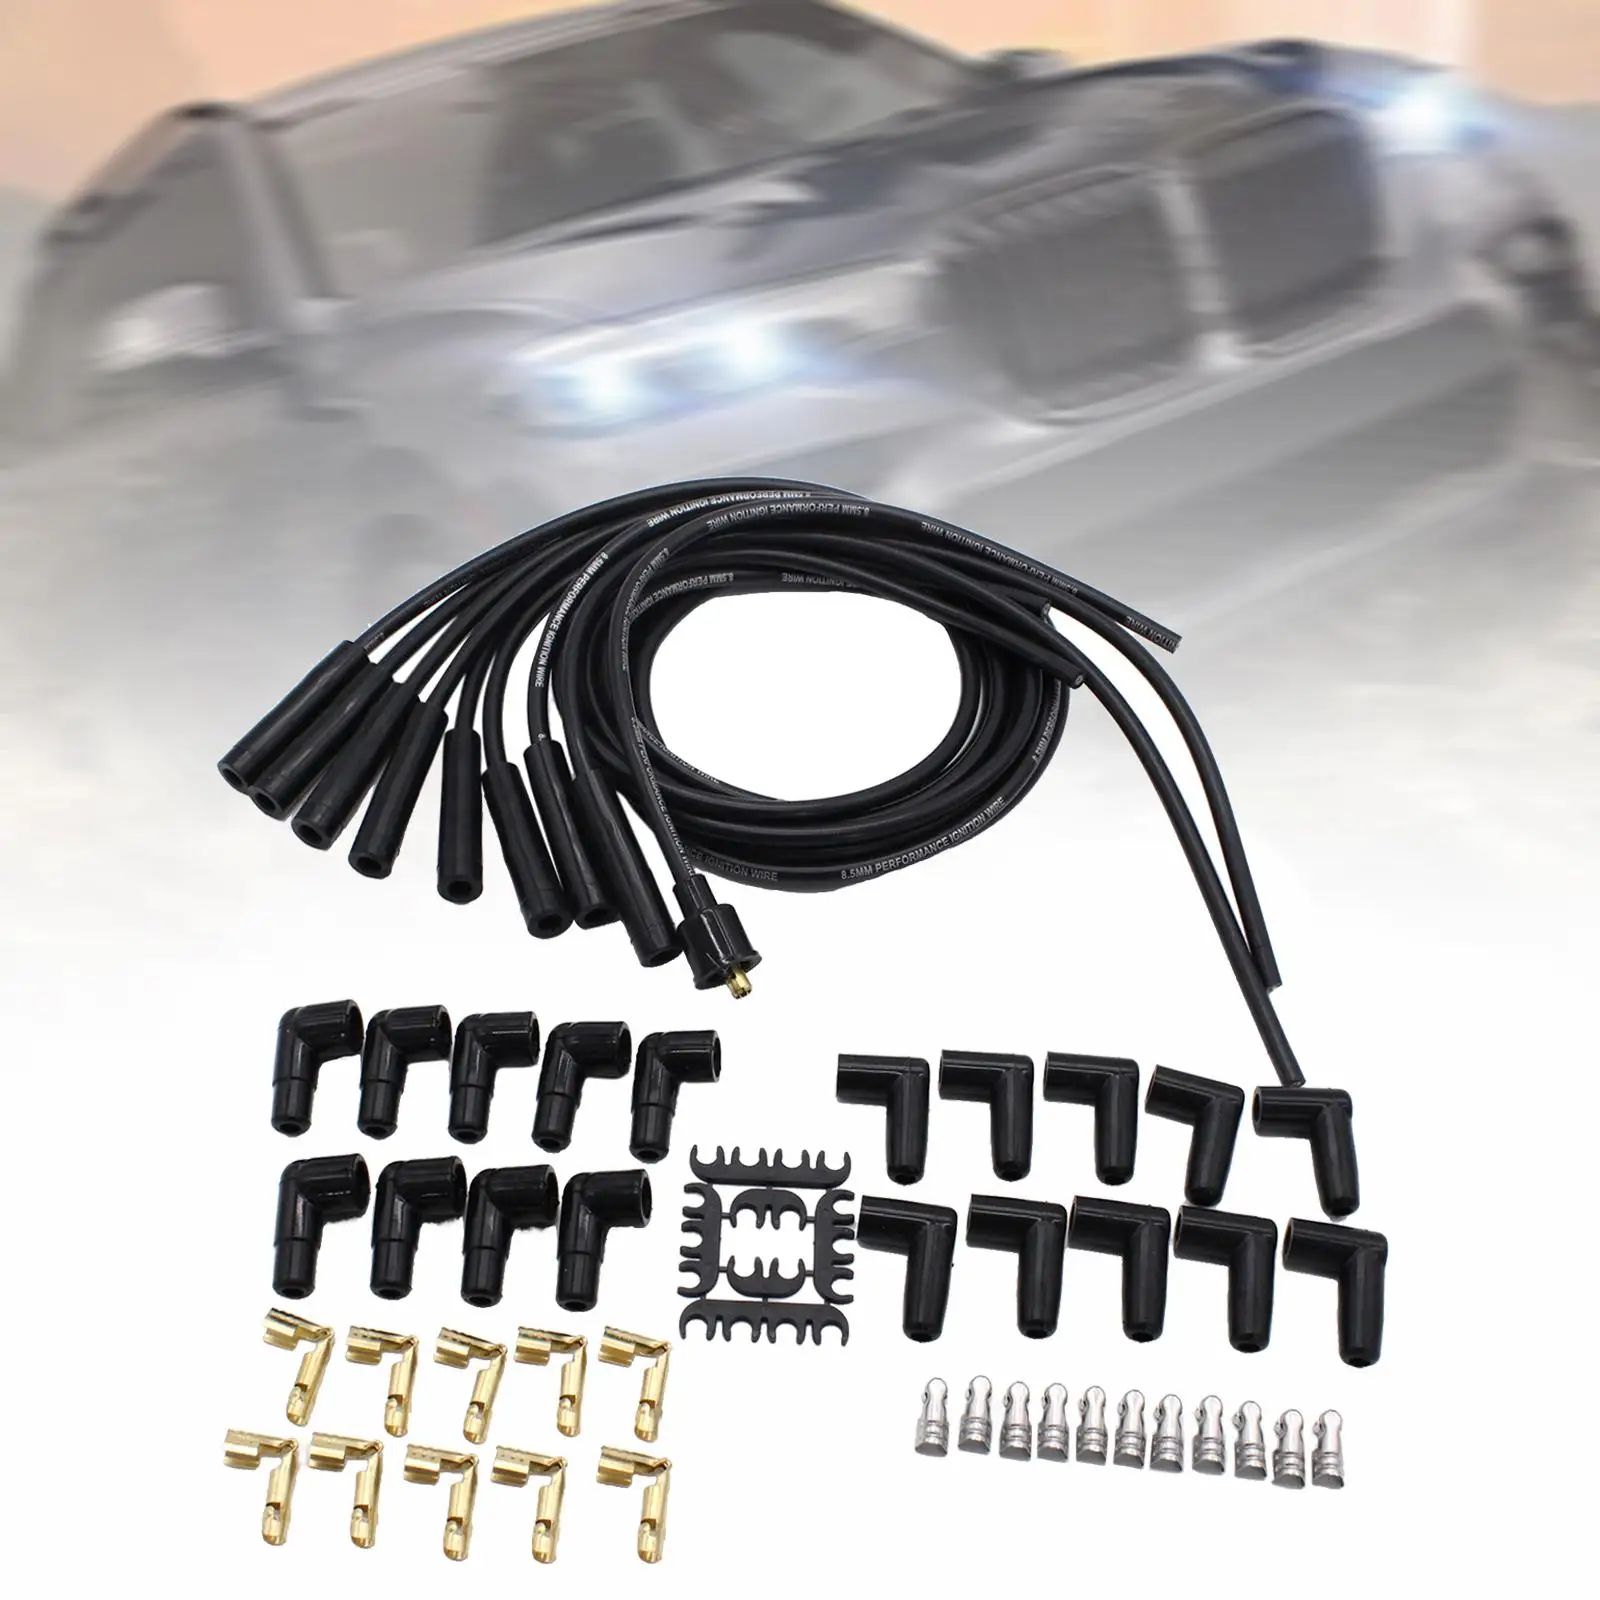 Spark Plug Wire Set Spare Parts Long Service Life Durable Car Accessories Universal with 180 Spark Plug Boot 8mm Automotive